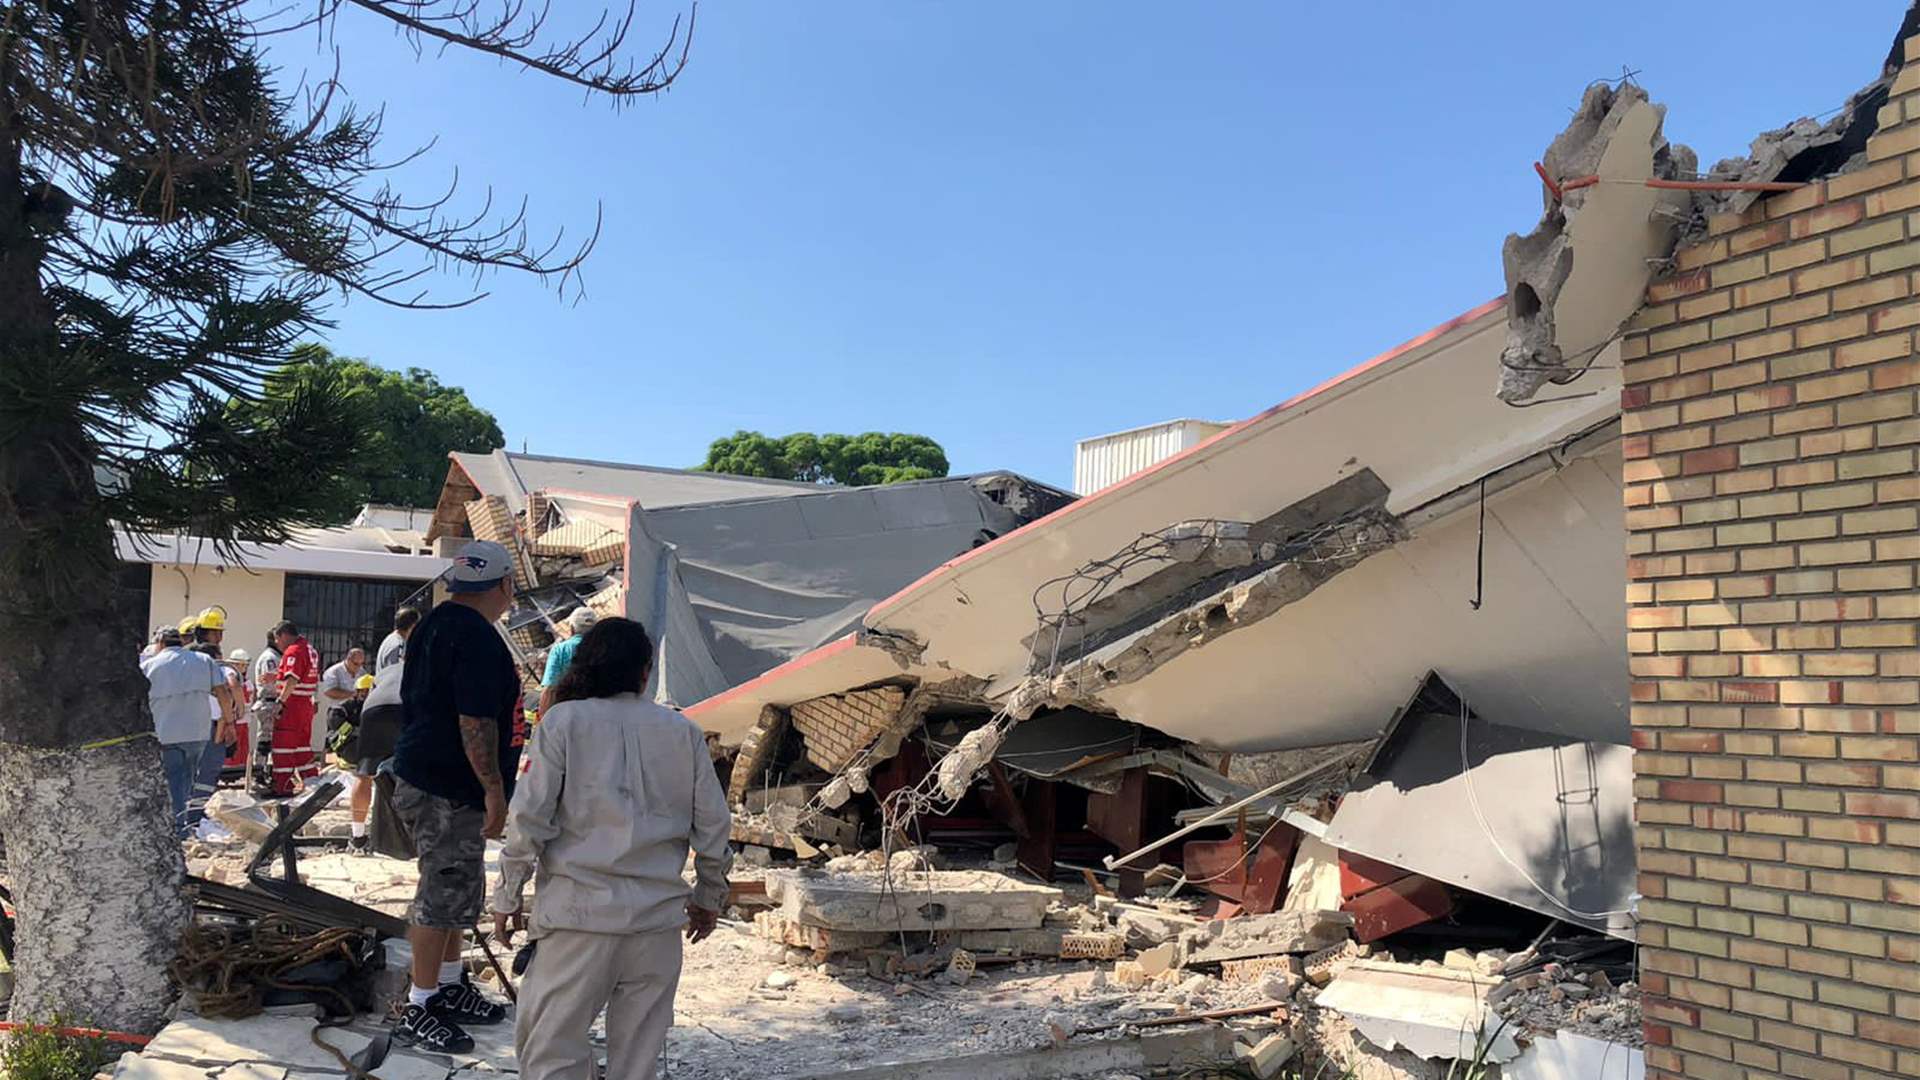 At least seven dead after church roof collapses in Mexico